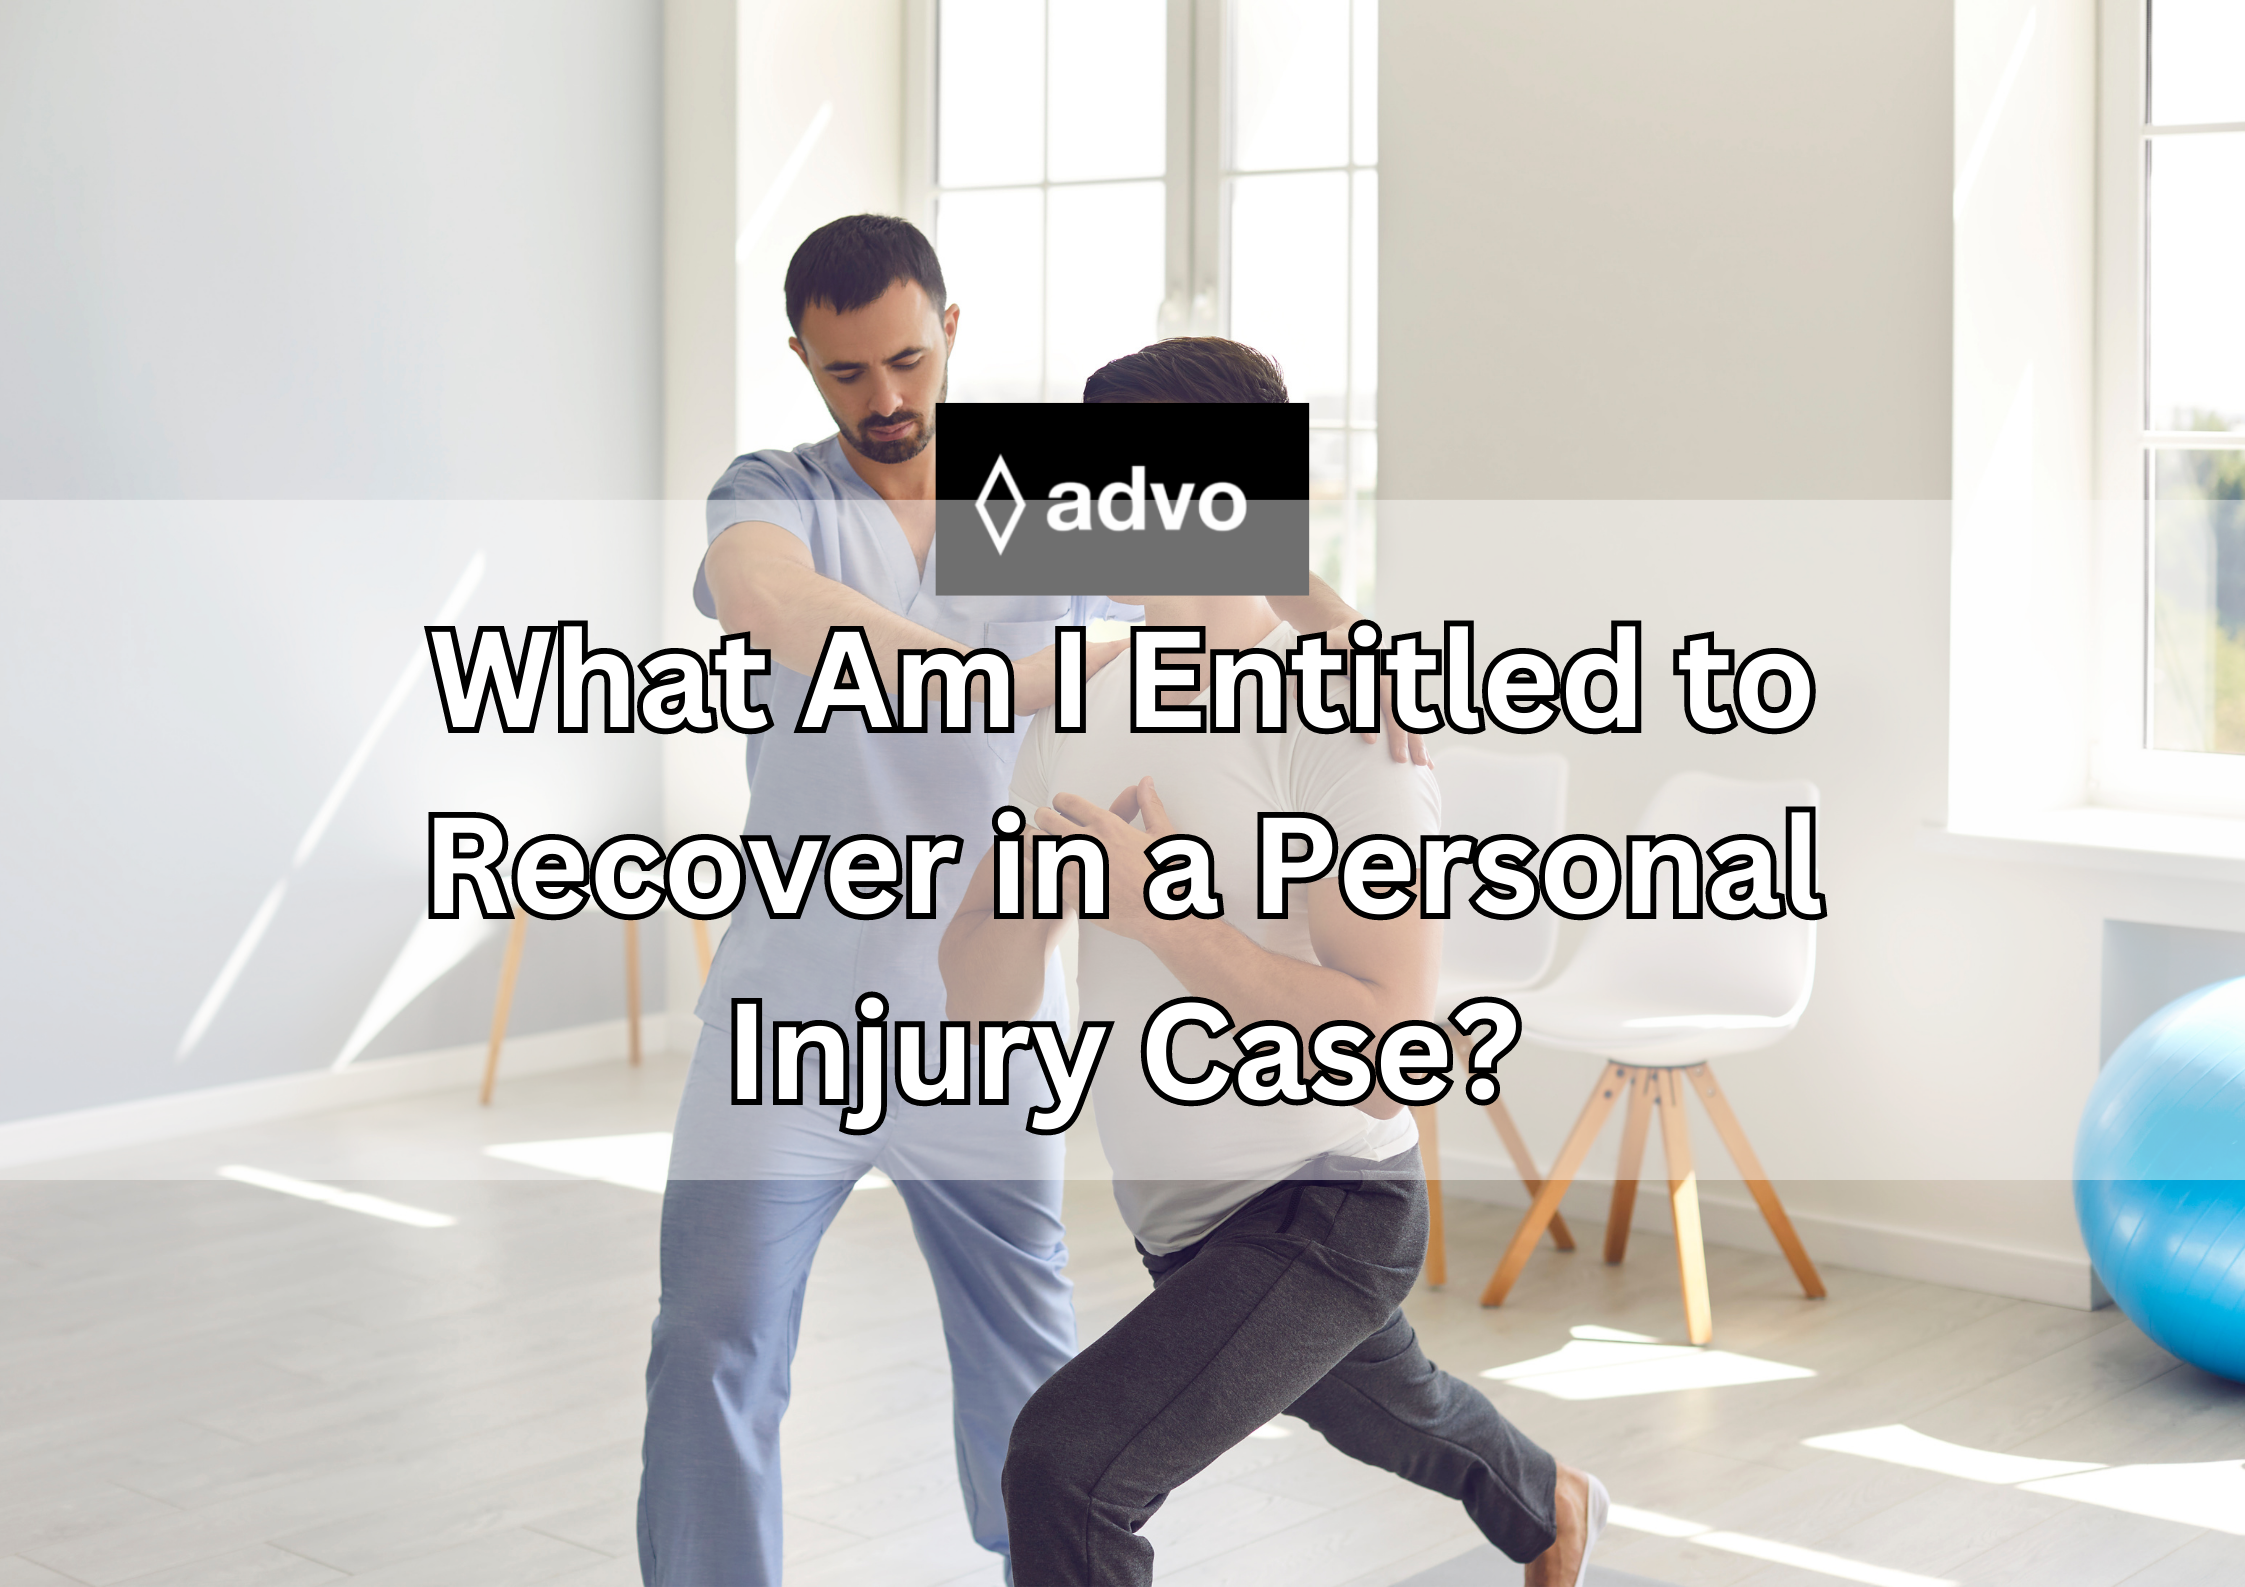 Seeking expert legal advice for serious personal injury in California